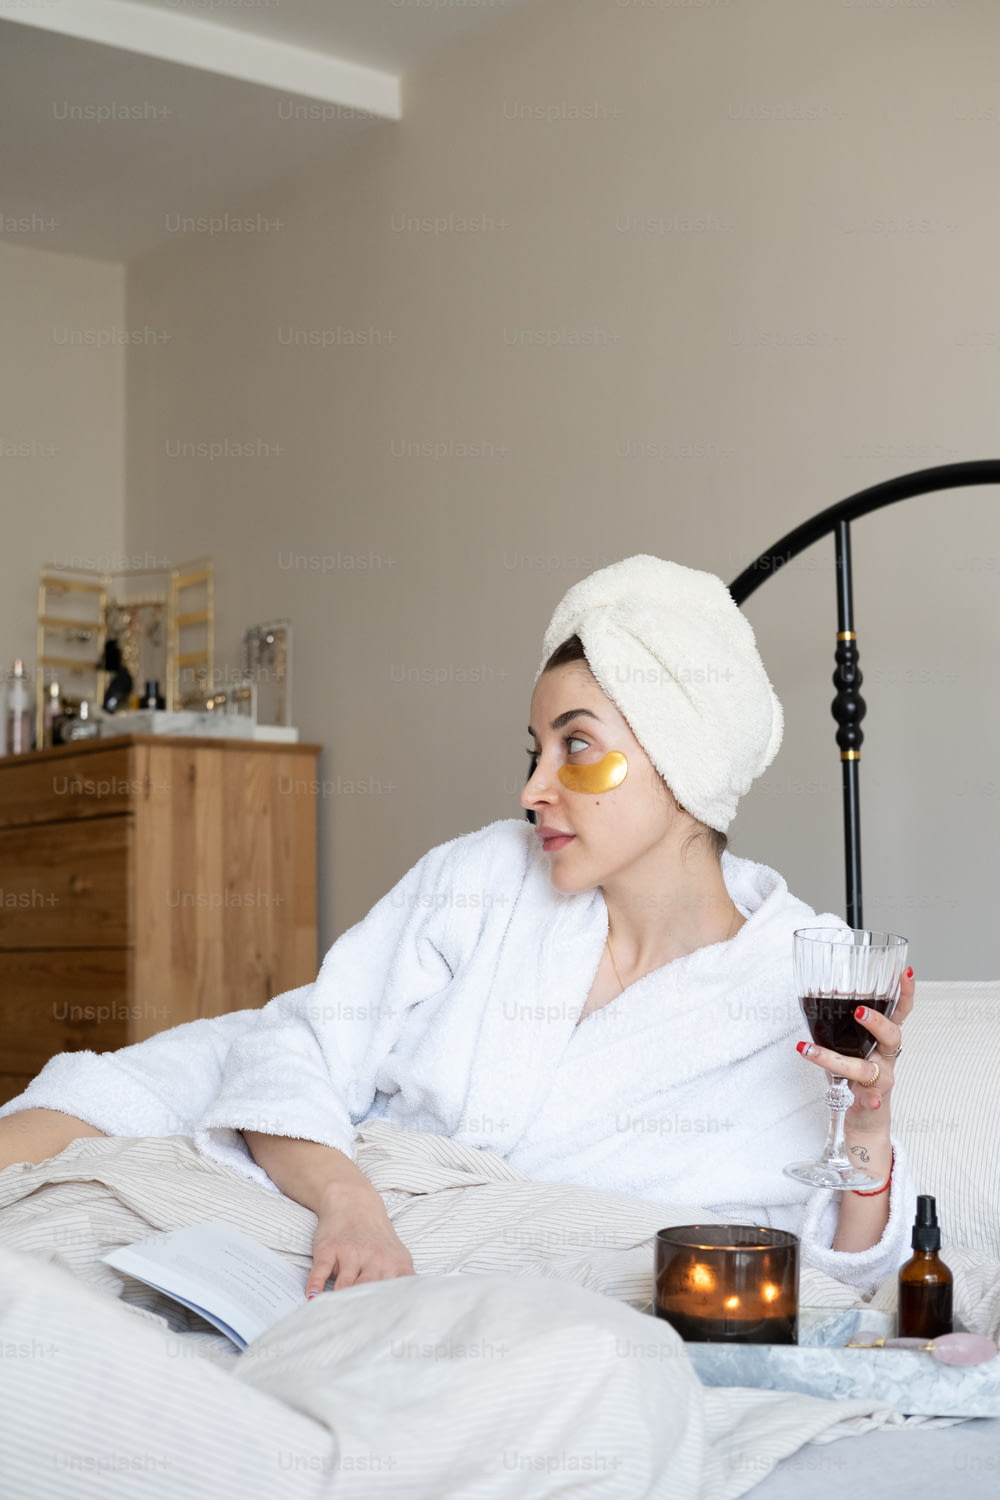 a woman in a bathrobe holding a glass of wine